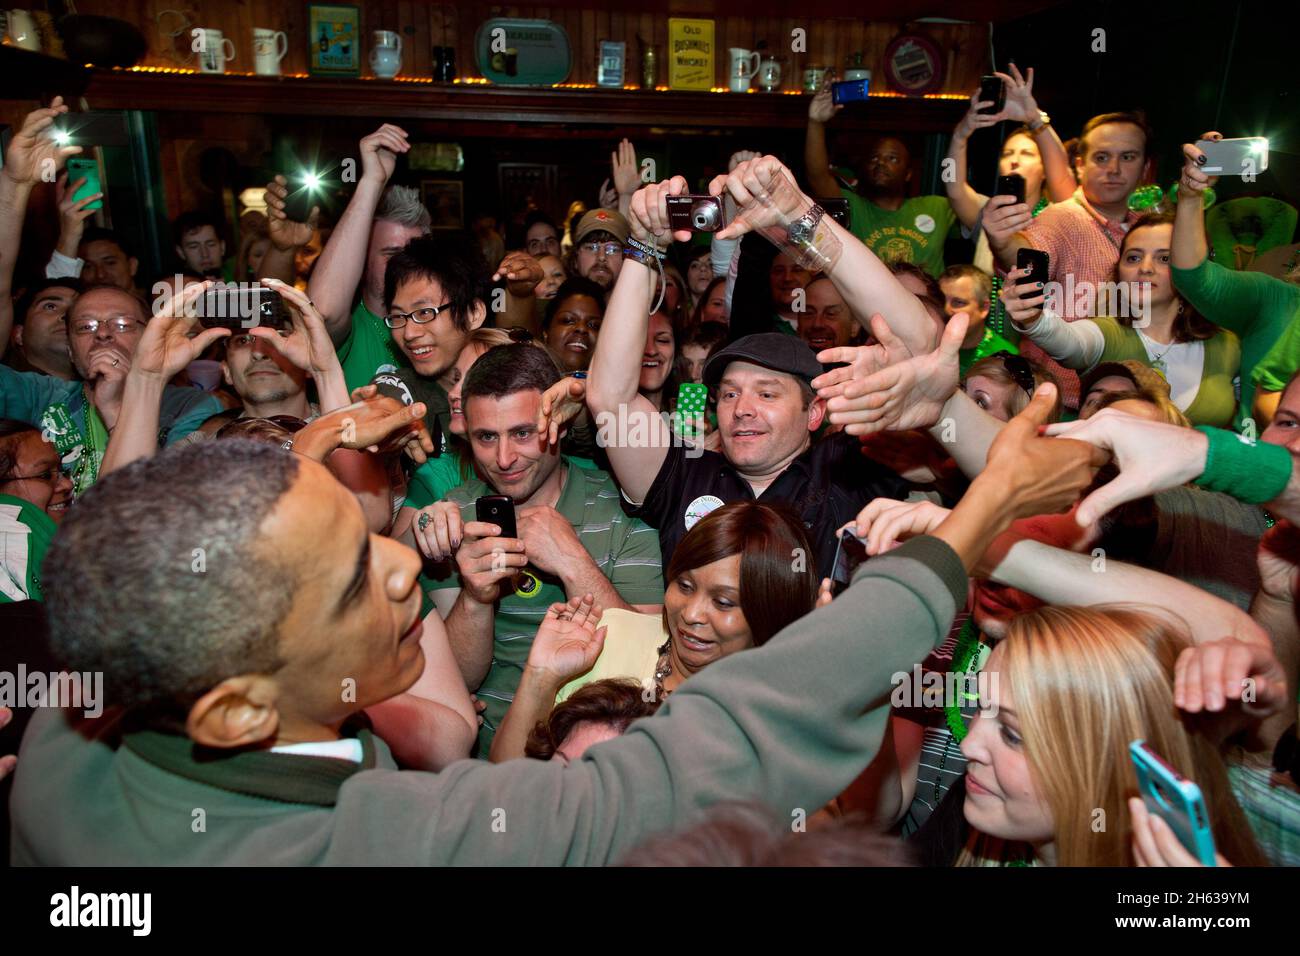 President Barack Obama greets the crowd at the Dubliner, an Irish pub in Washington, D.C., on St. Patrick's Day, Saturday, March 17, 2012 Stock Photo